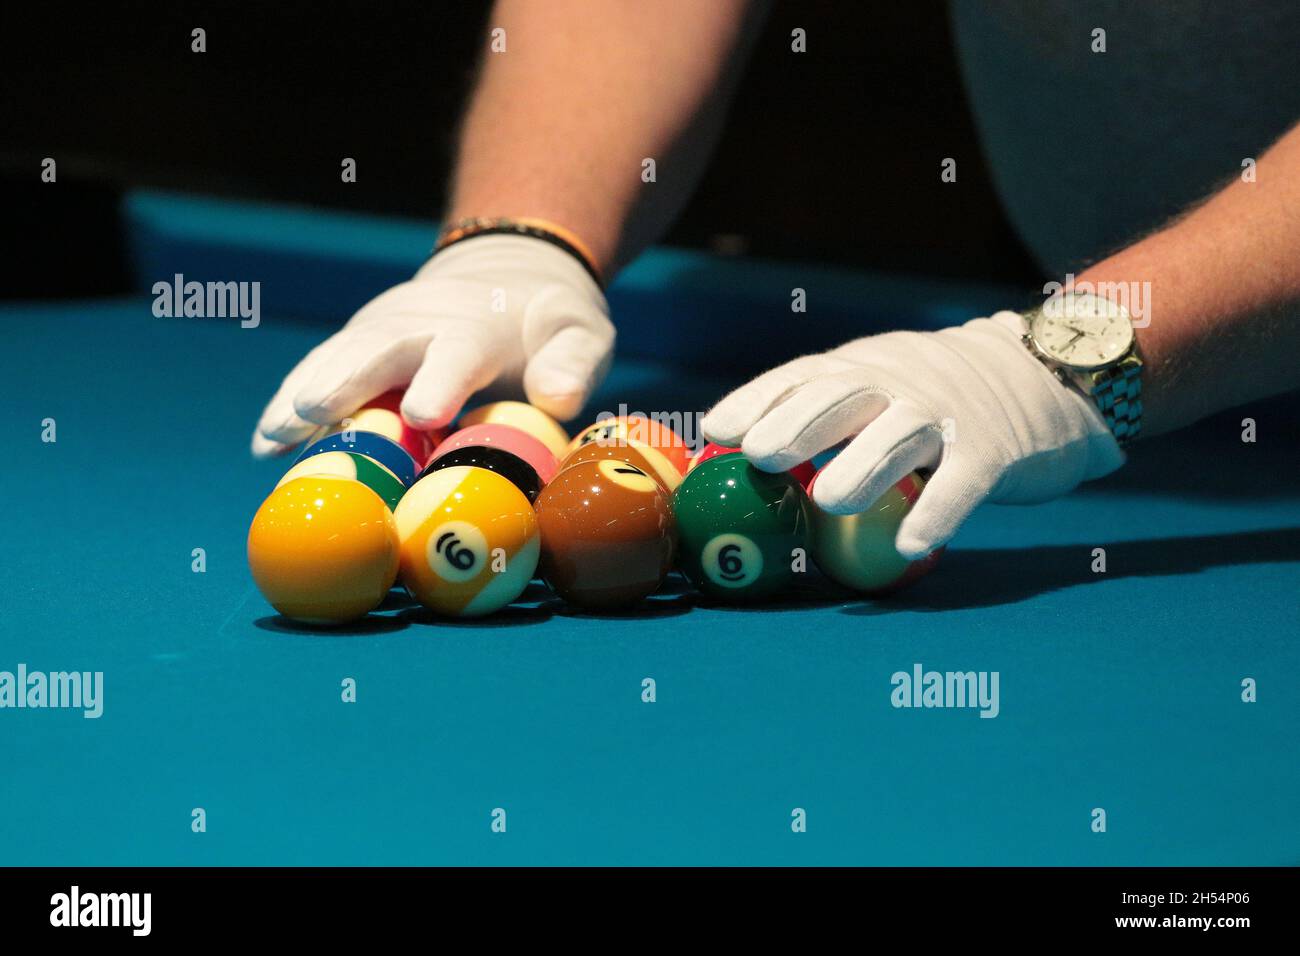 A referee checks, with white gloves, the billiard balls lying in a triangle. Stock Photo